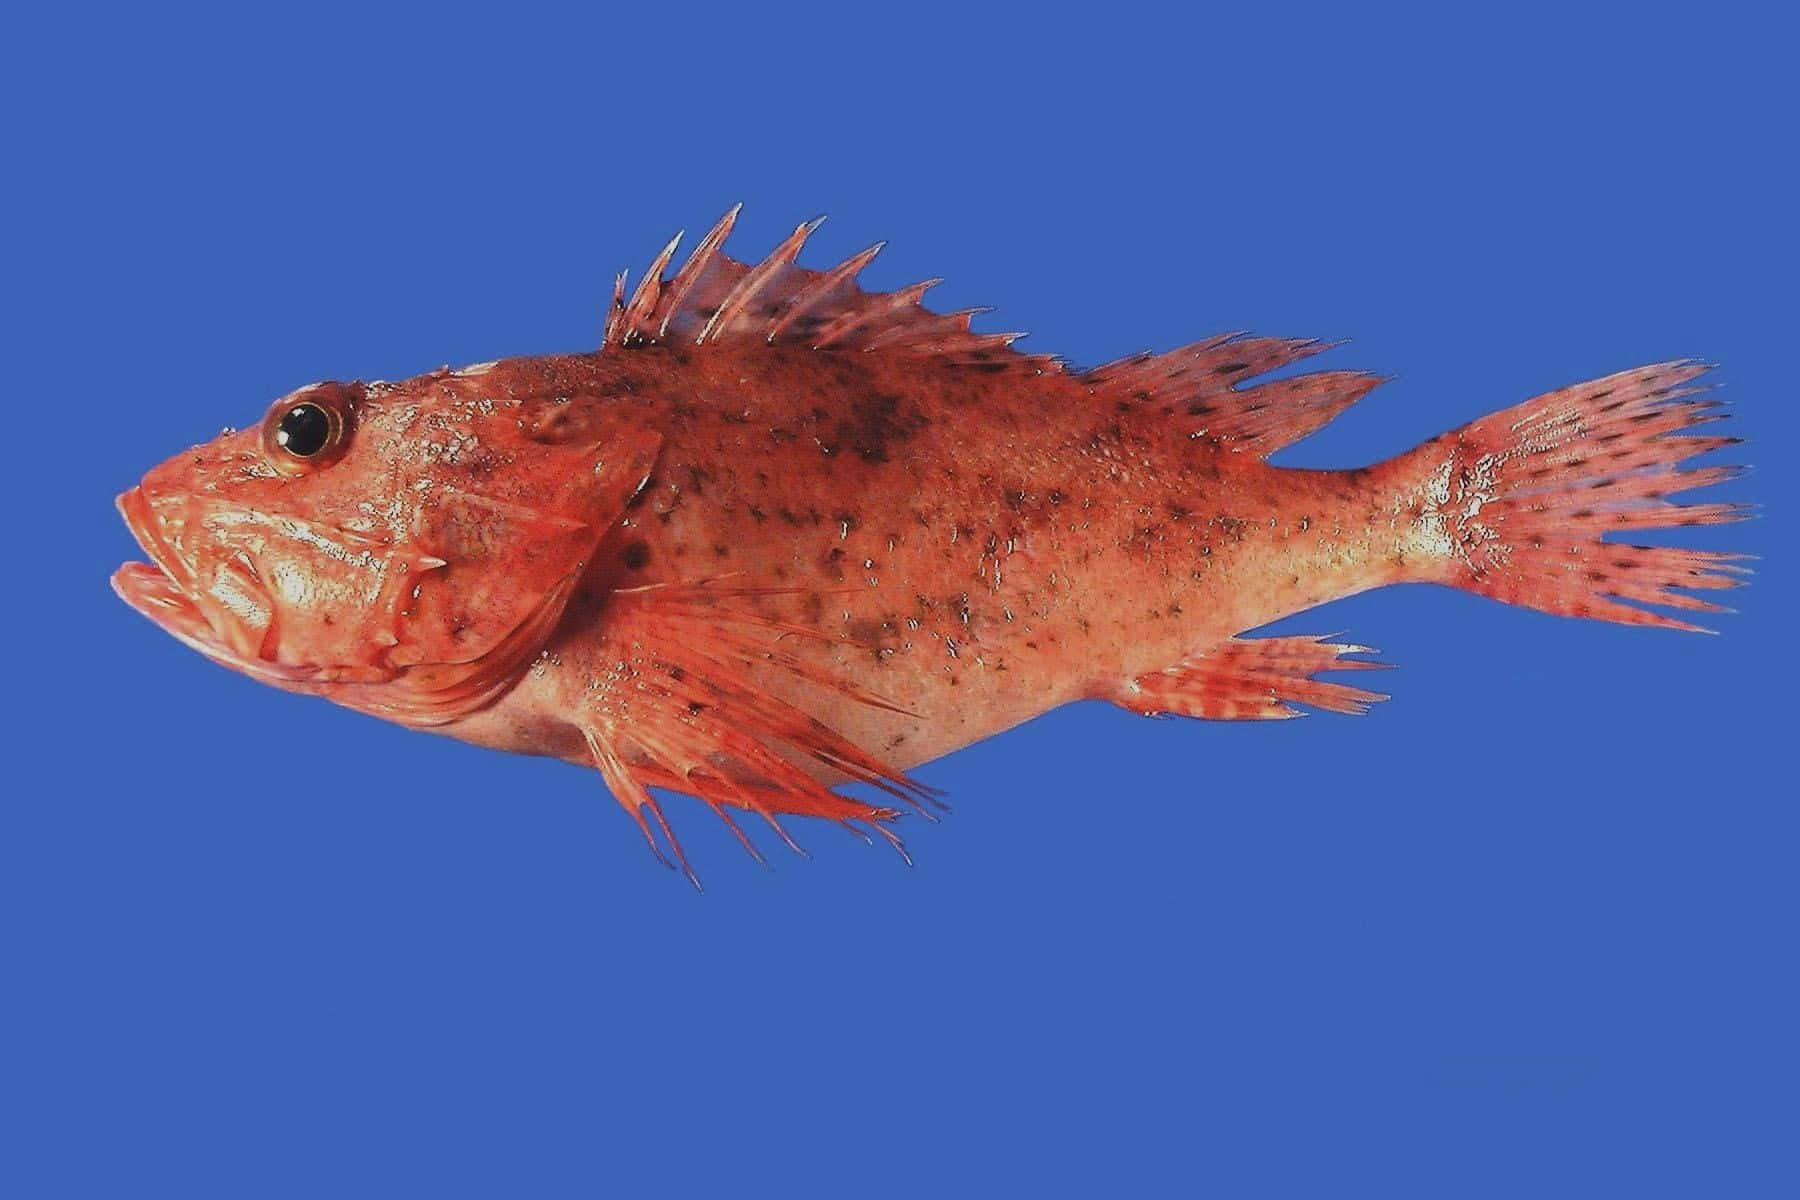 Unusual Beauty Underwater: A Close Encounter With The Exotic Scorpionfish Wallpaper